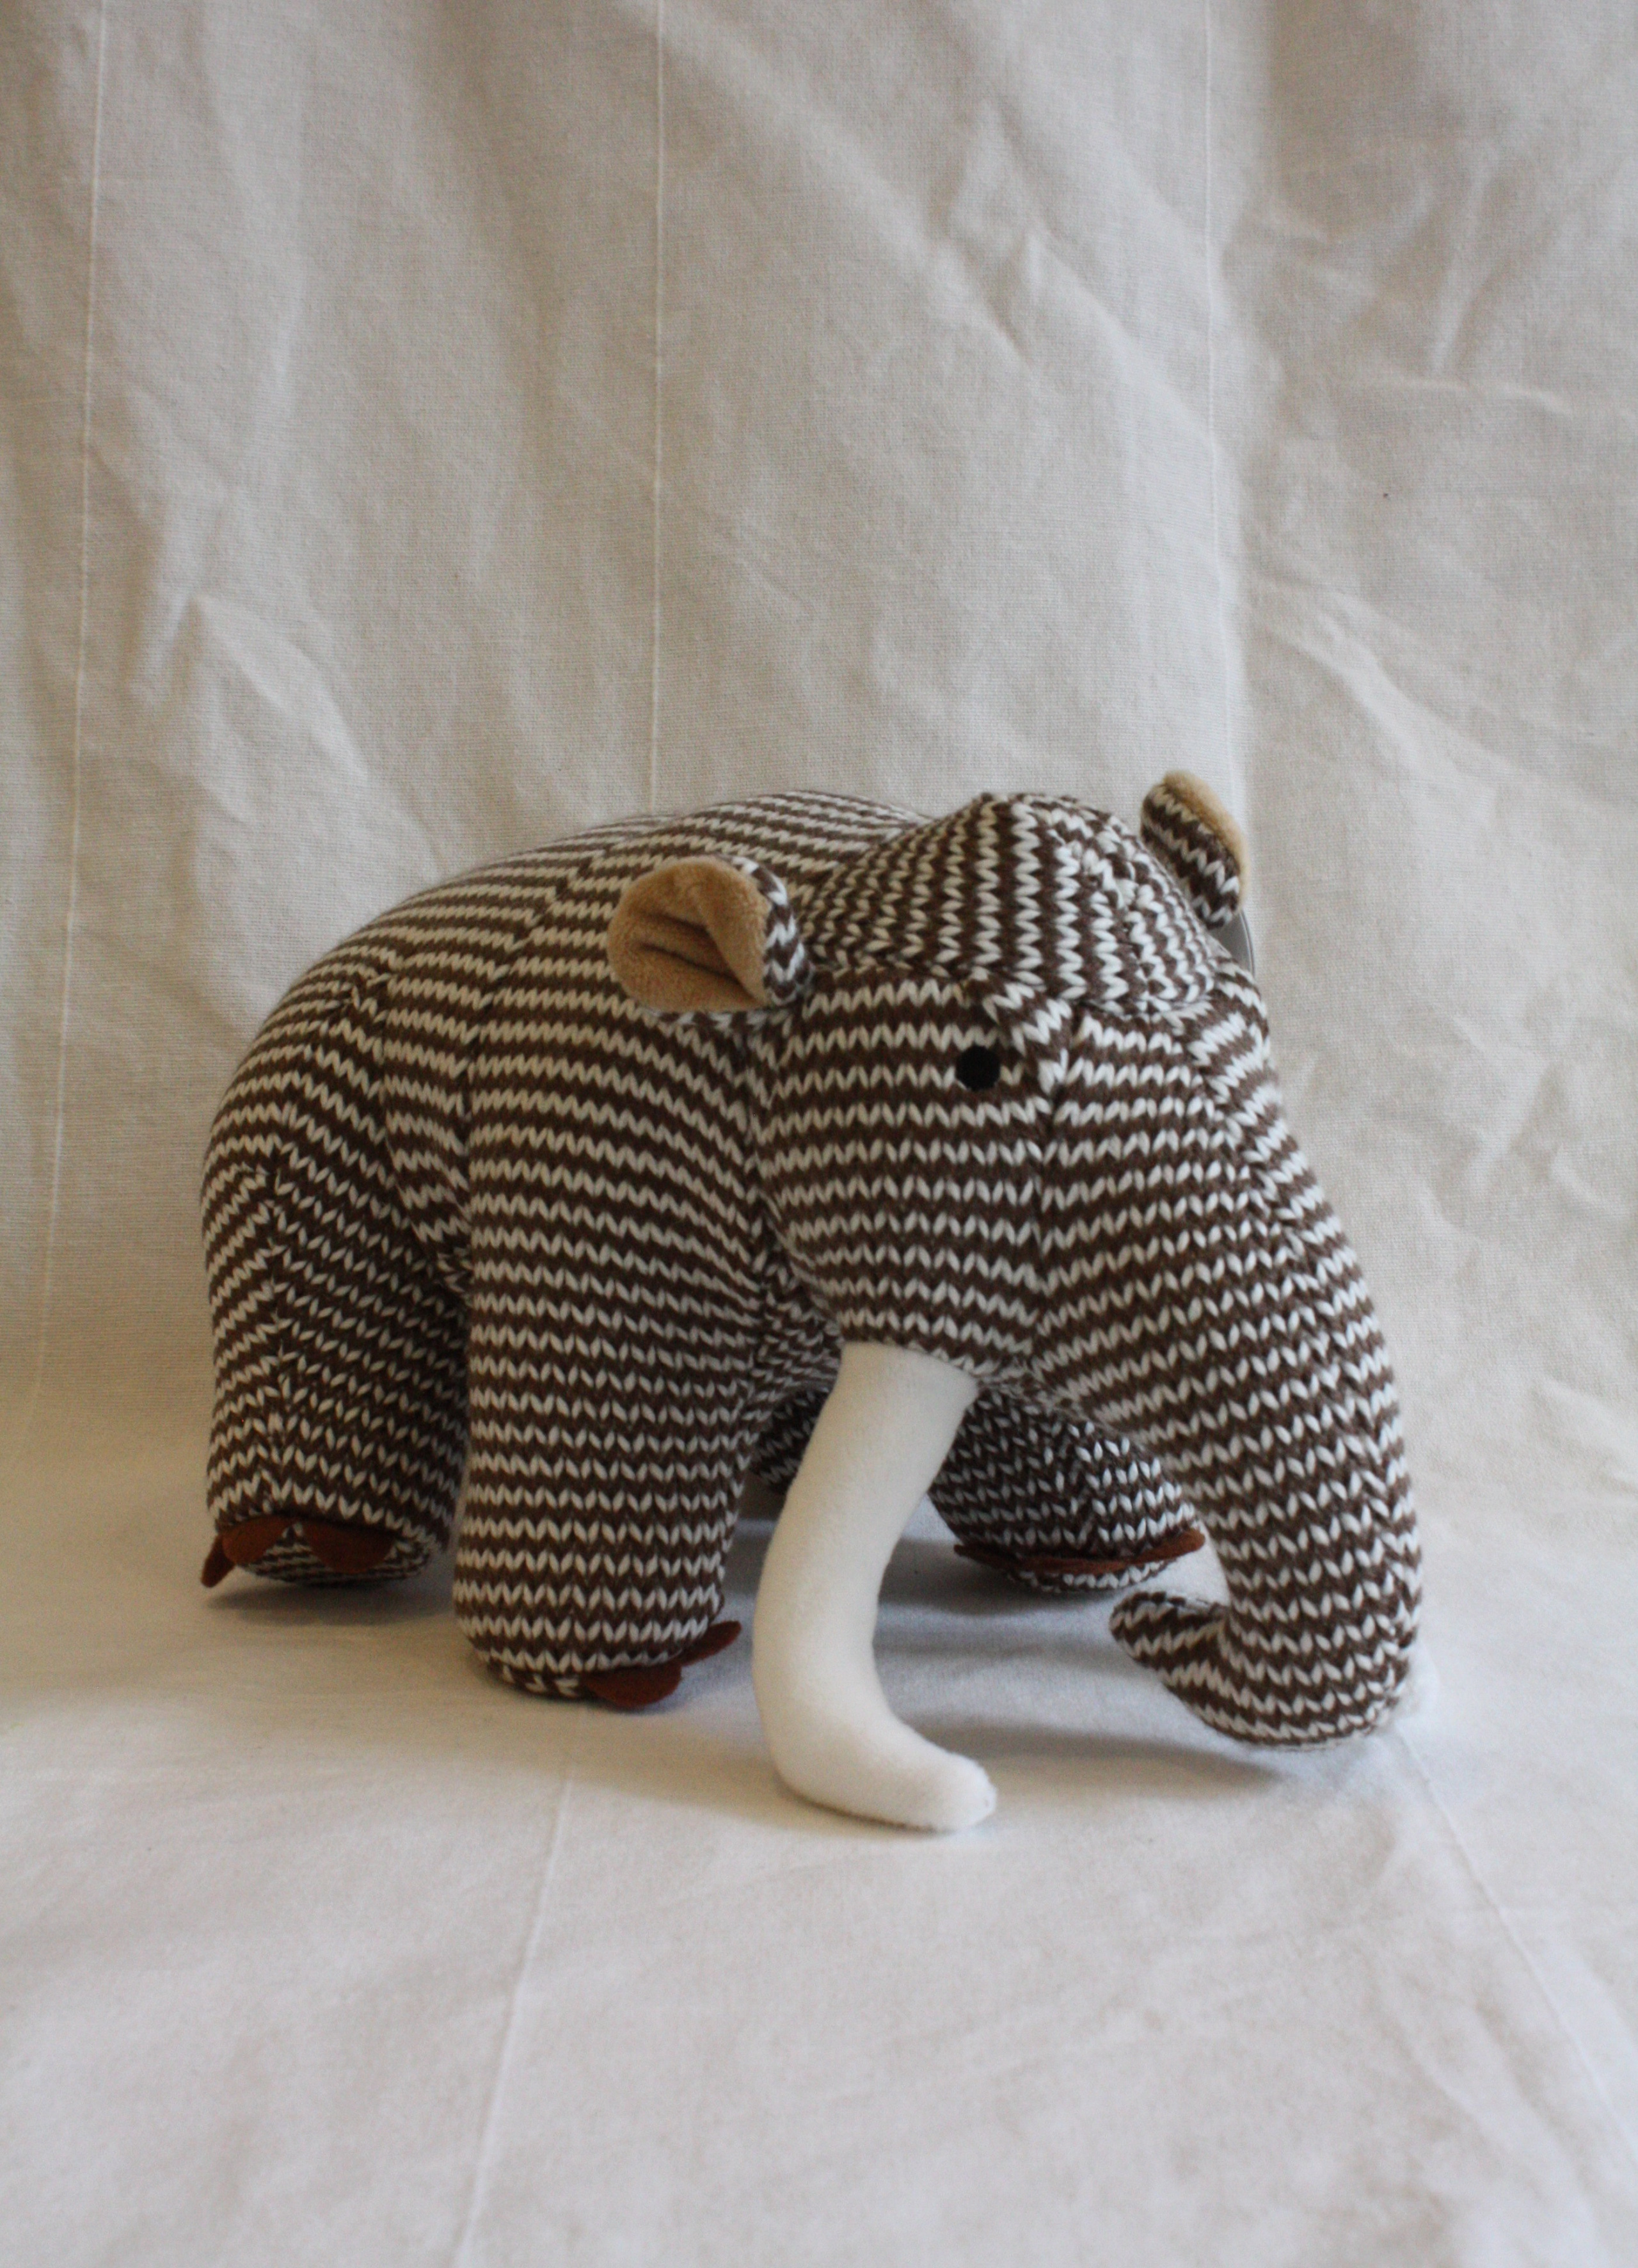 Best Years Medium Knitted Woolly Mammoth Toy